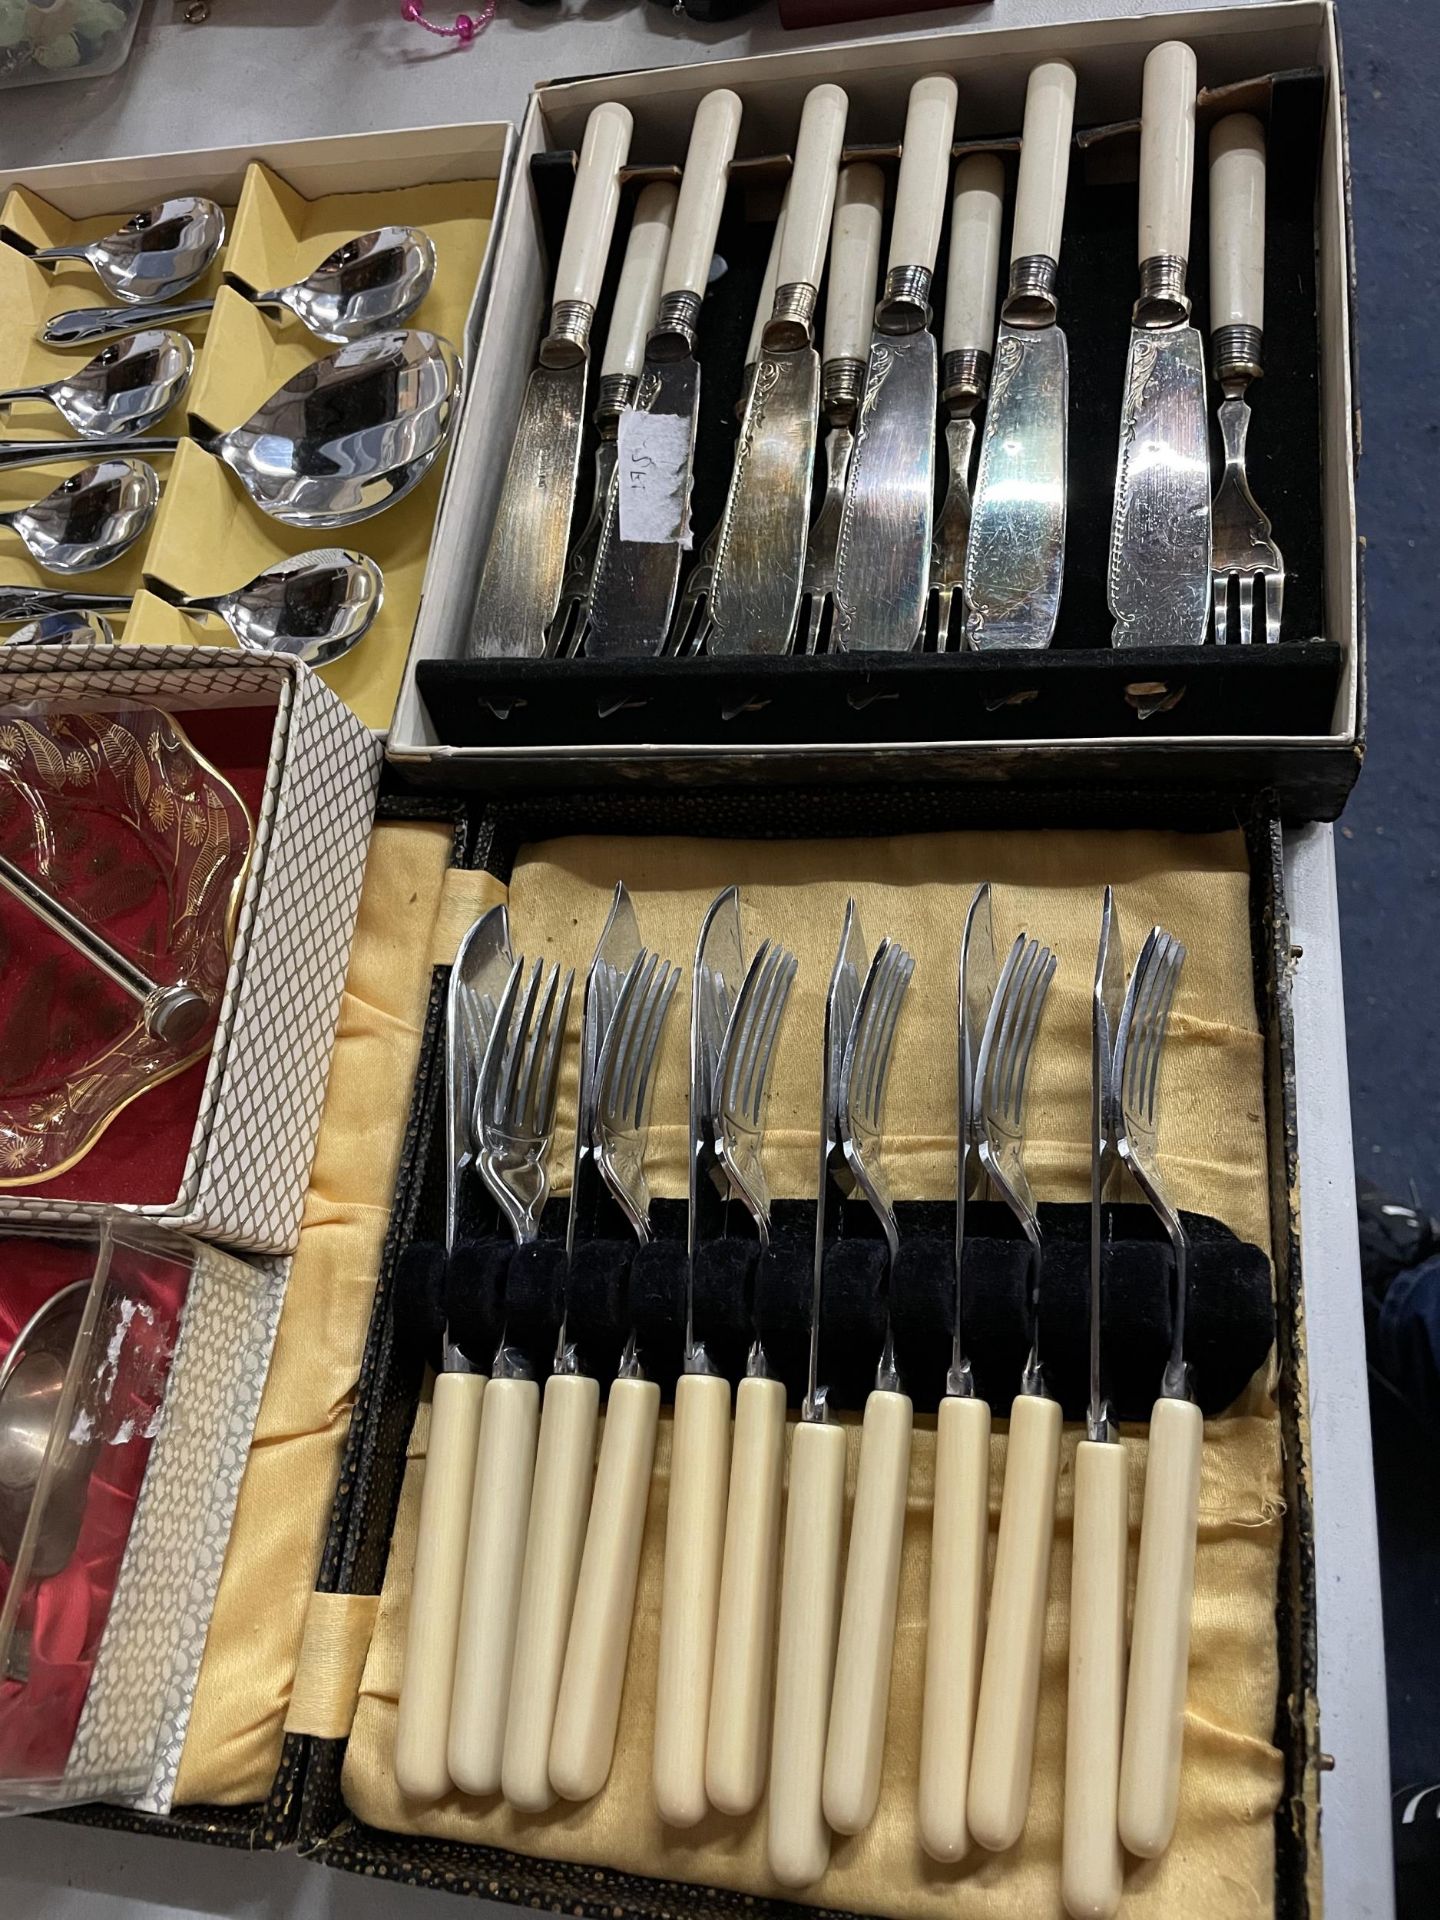 SIX BOXES OF FLATWARE TO INCLUDE KNIVES, FORKS, SPOONS ETC, PLUS A BOXED EGGCUP, NAPKIN RING SET - Image 2 of 4